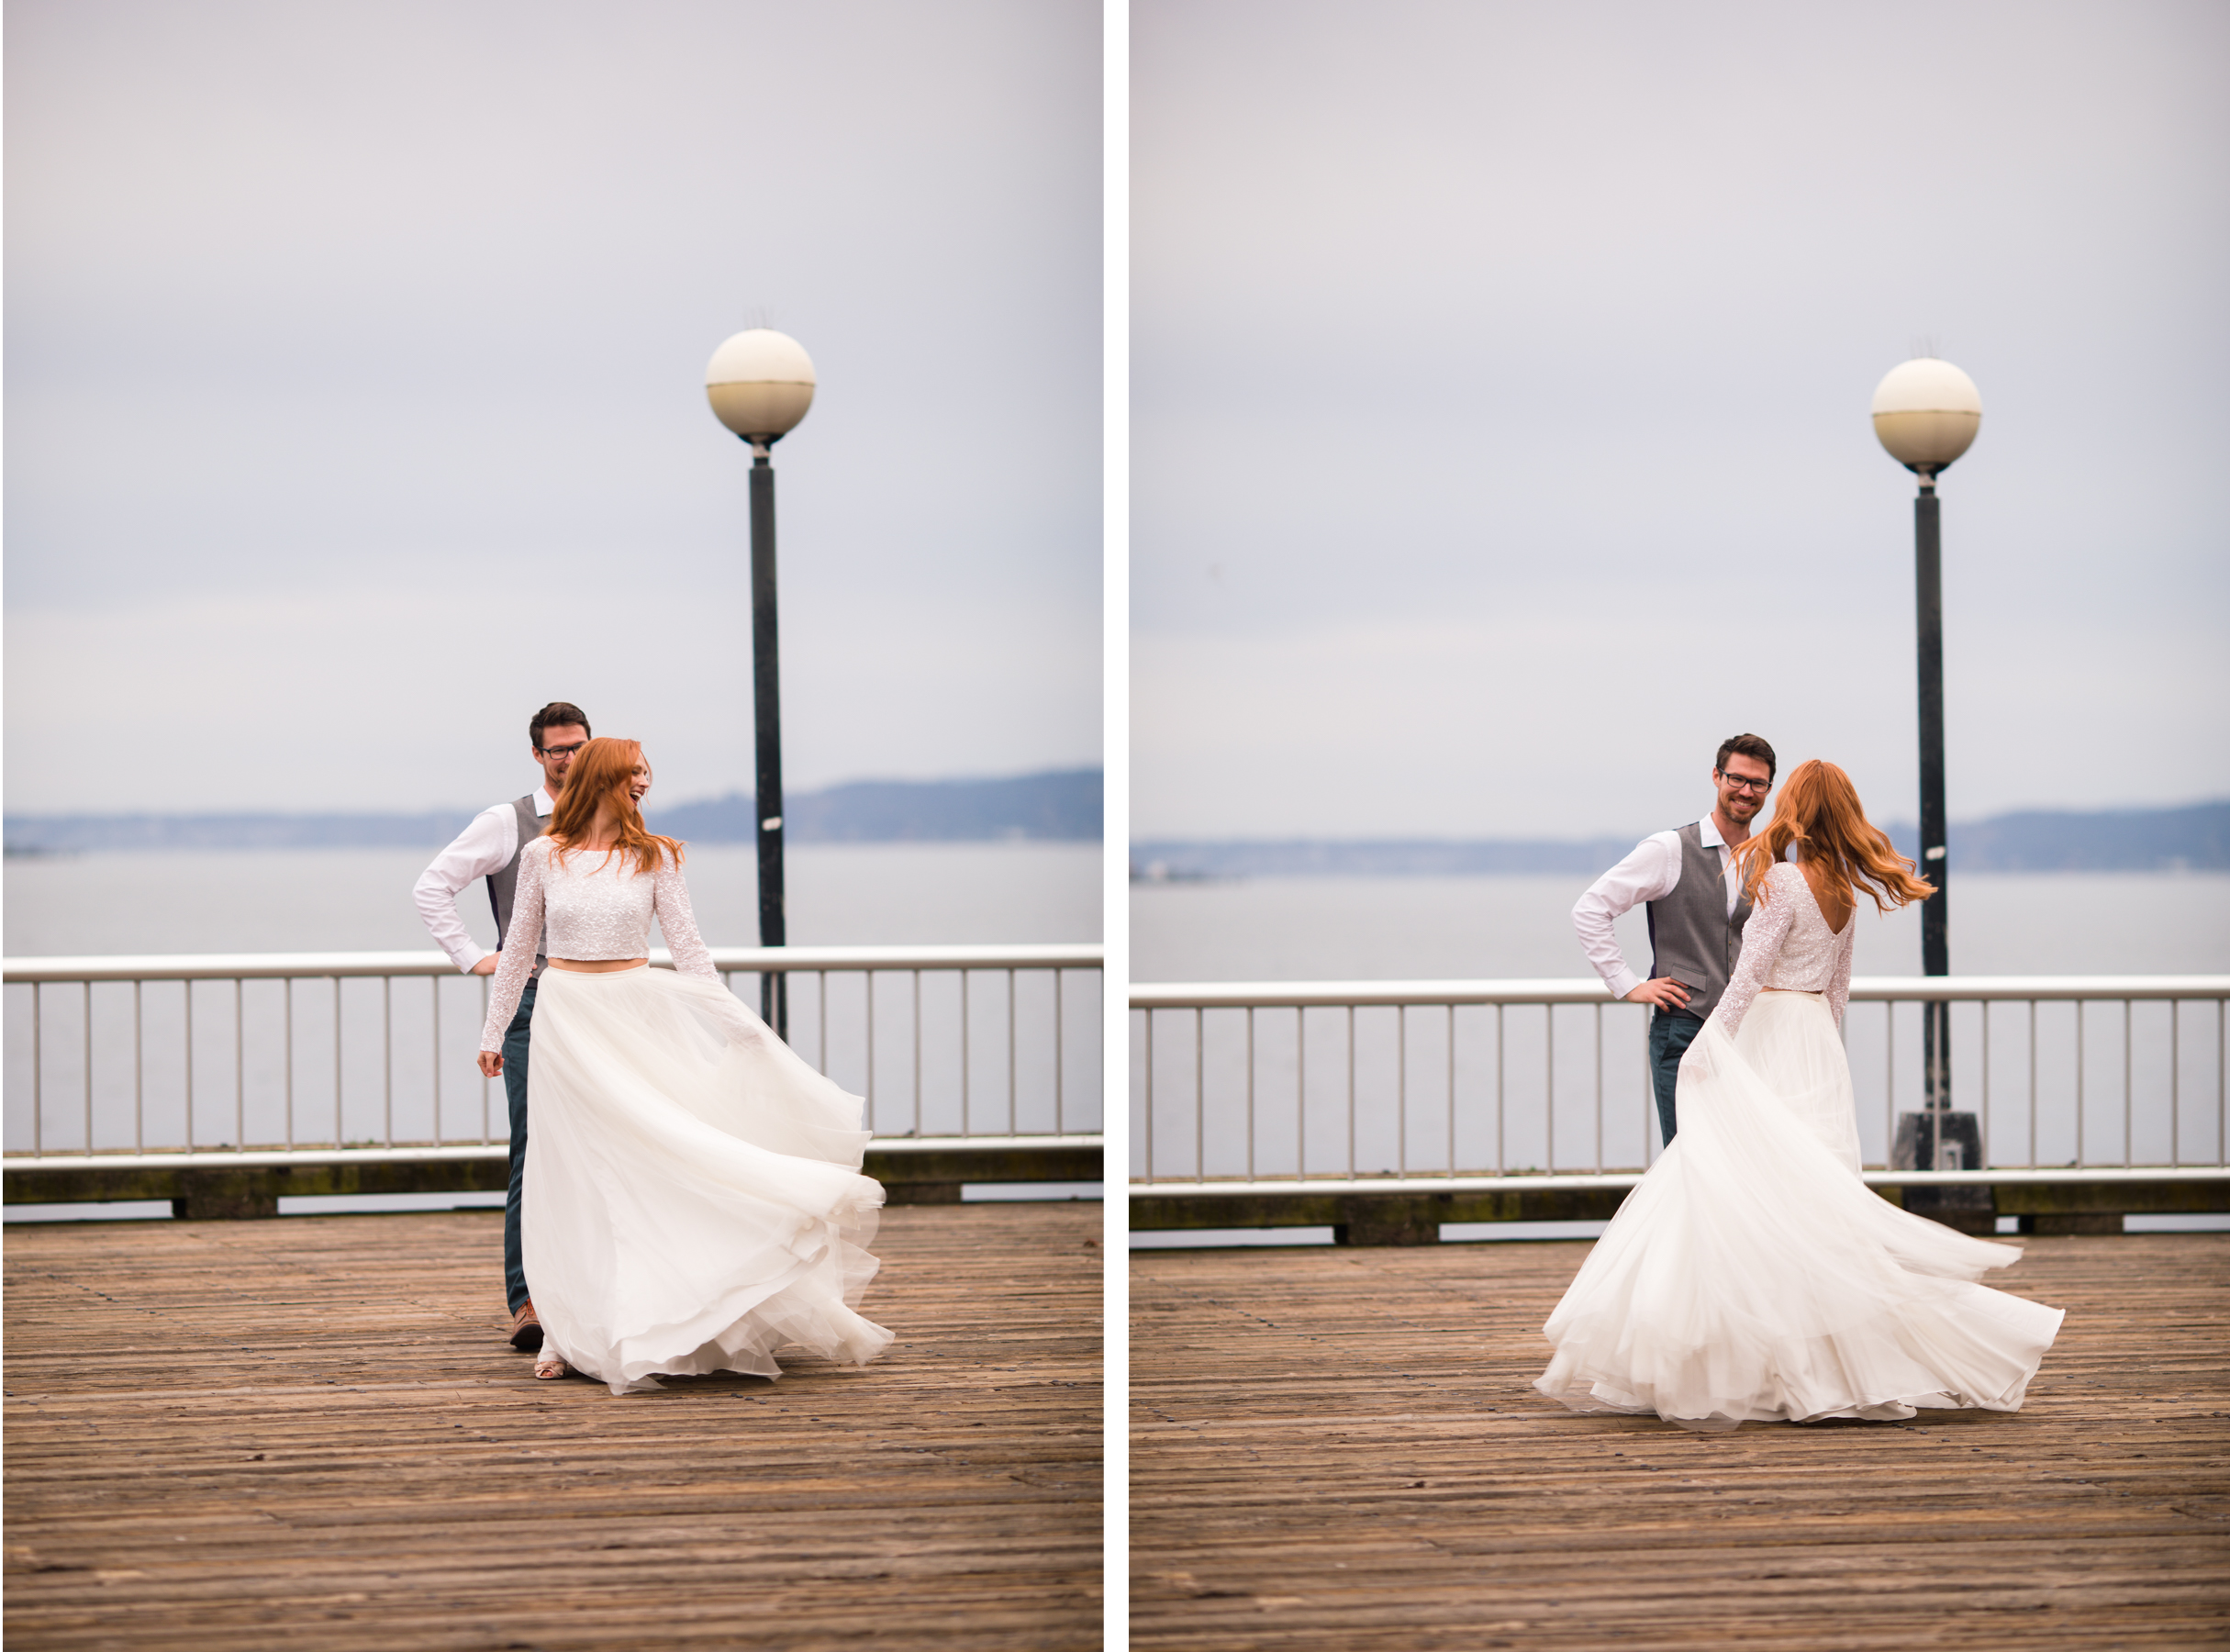 Red Haired Bride twirling on the pier